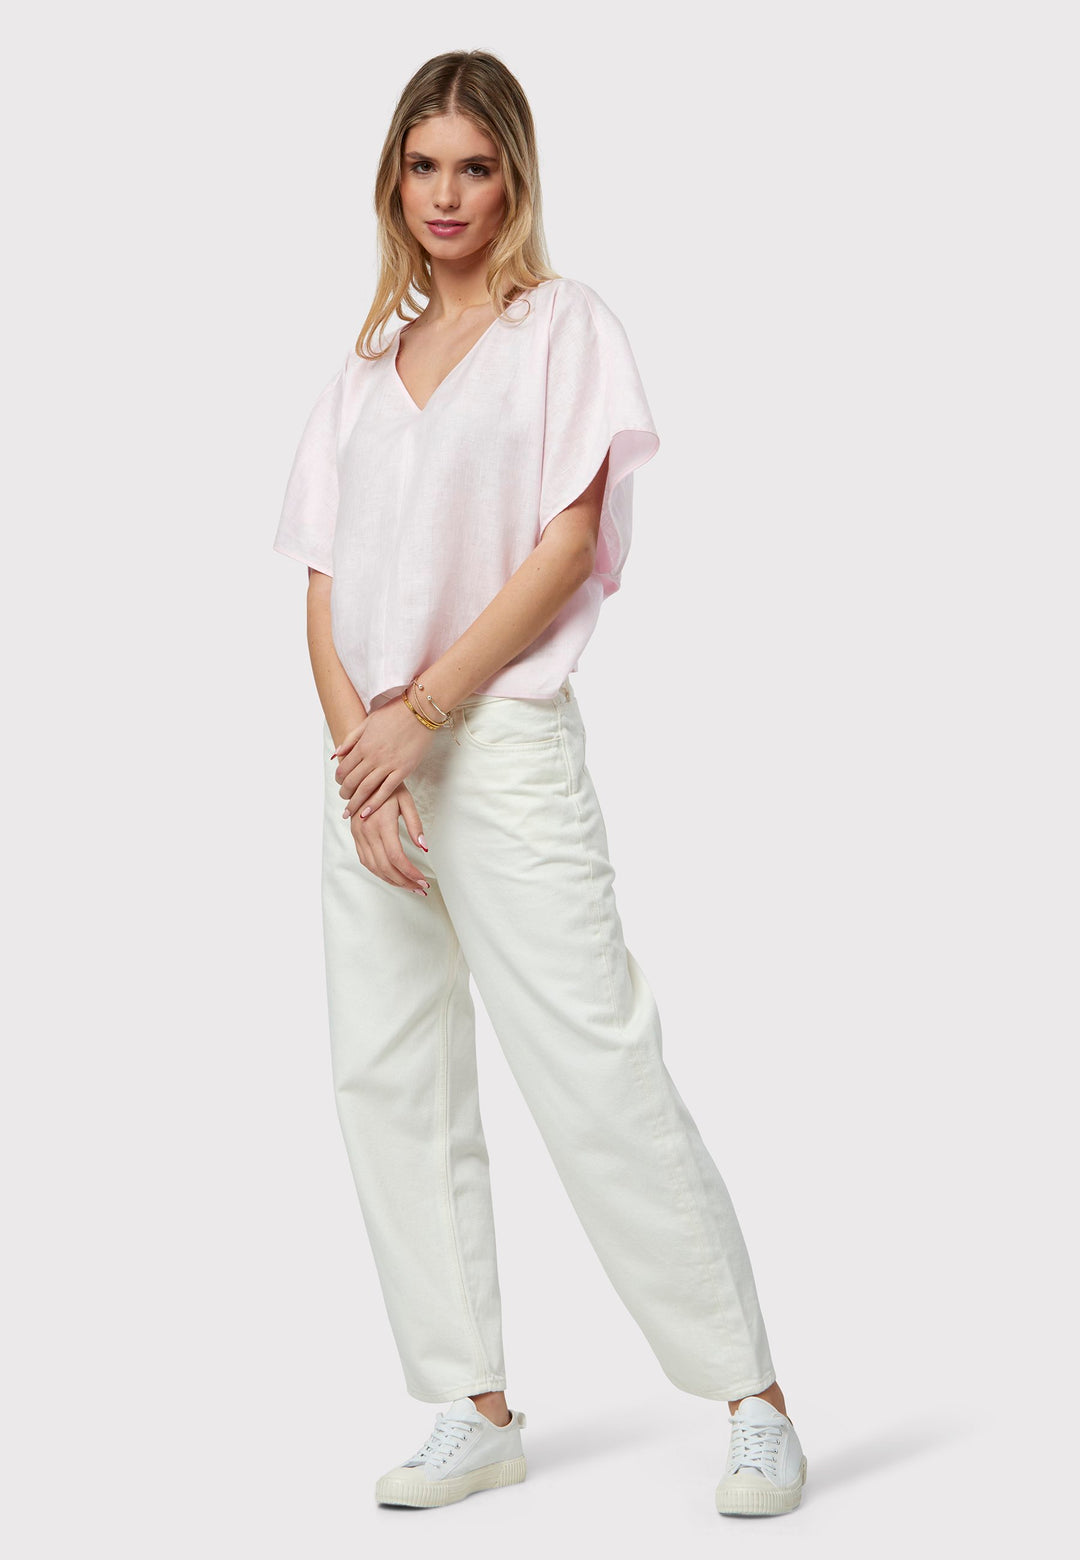 The Quinn Pink Linen Shirt captures an effortless warm-weather vibe, made from breathable pure linen and featuring a flattering v-neck design. Its relaxed fit guarantees summer comfort, enhanced by subtle pleat detailing on the back hem for an extra touch of style.